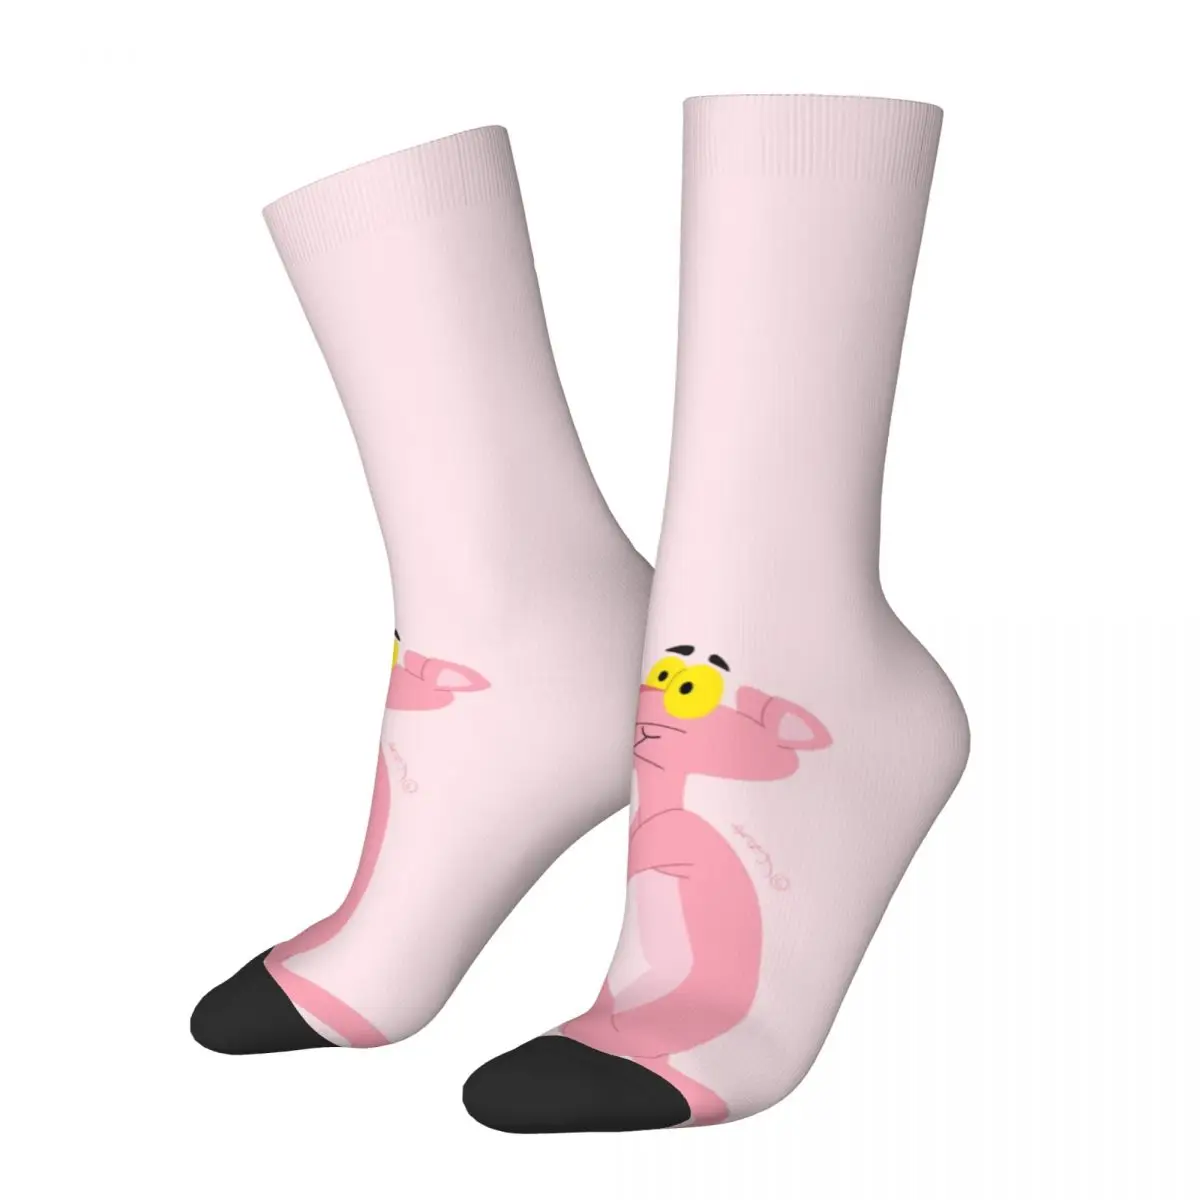 

Pink Panther Looking Up At The Distant World Men Women Socks Cycling Novelty Spring Summer Autumn Winter Stockings Gift